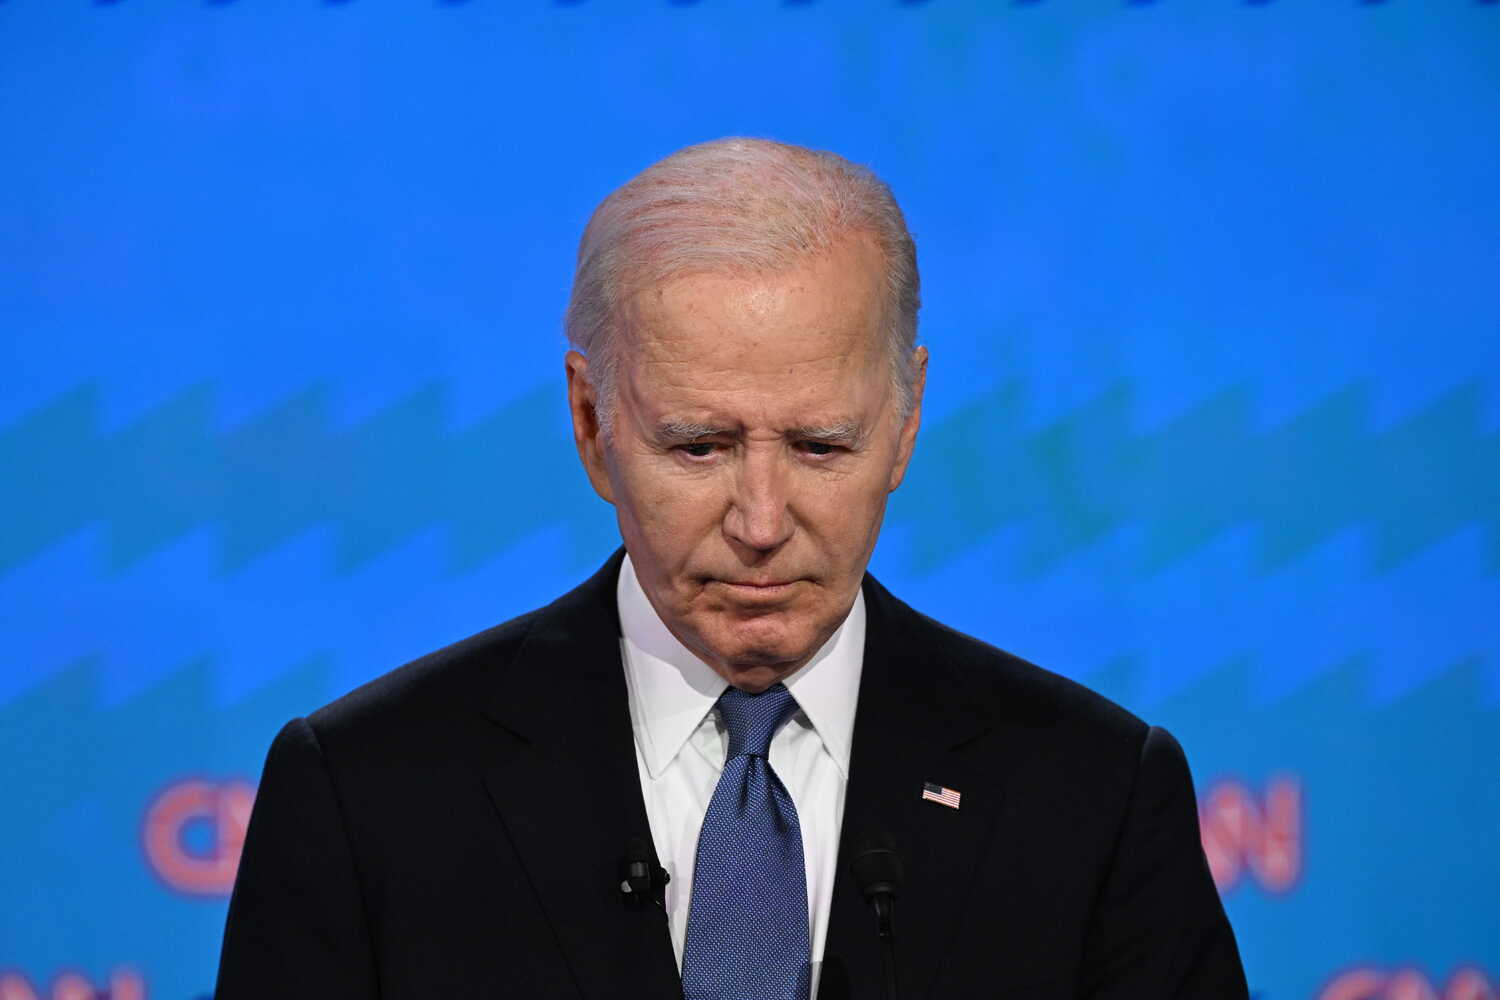 President Biden is not trying to convince voters that he won the debate or that his performance was something to brag about. But he has spent the past three days downplaying its impact.